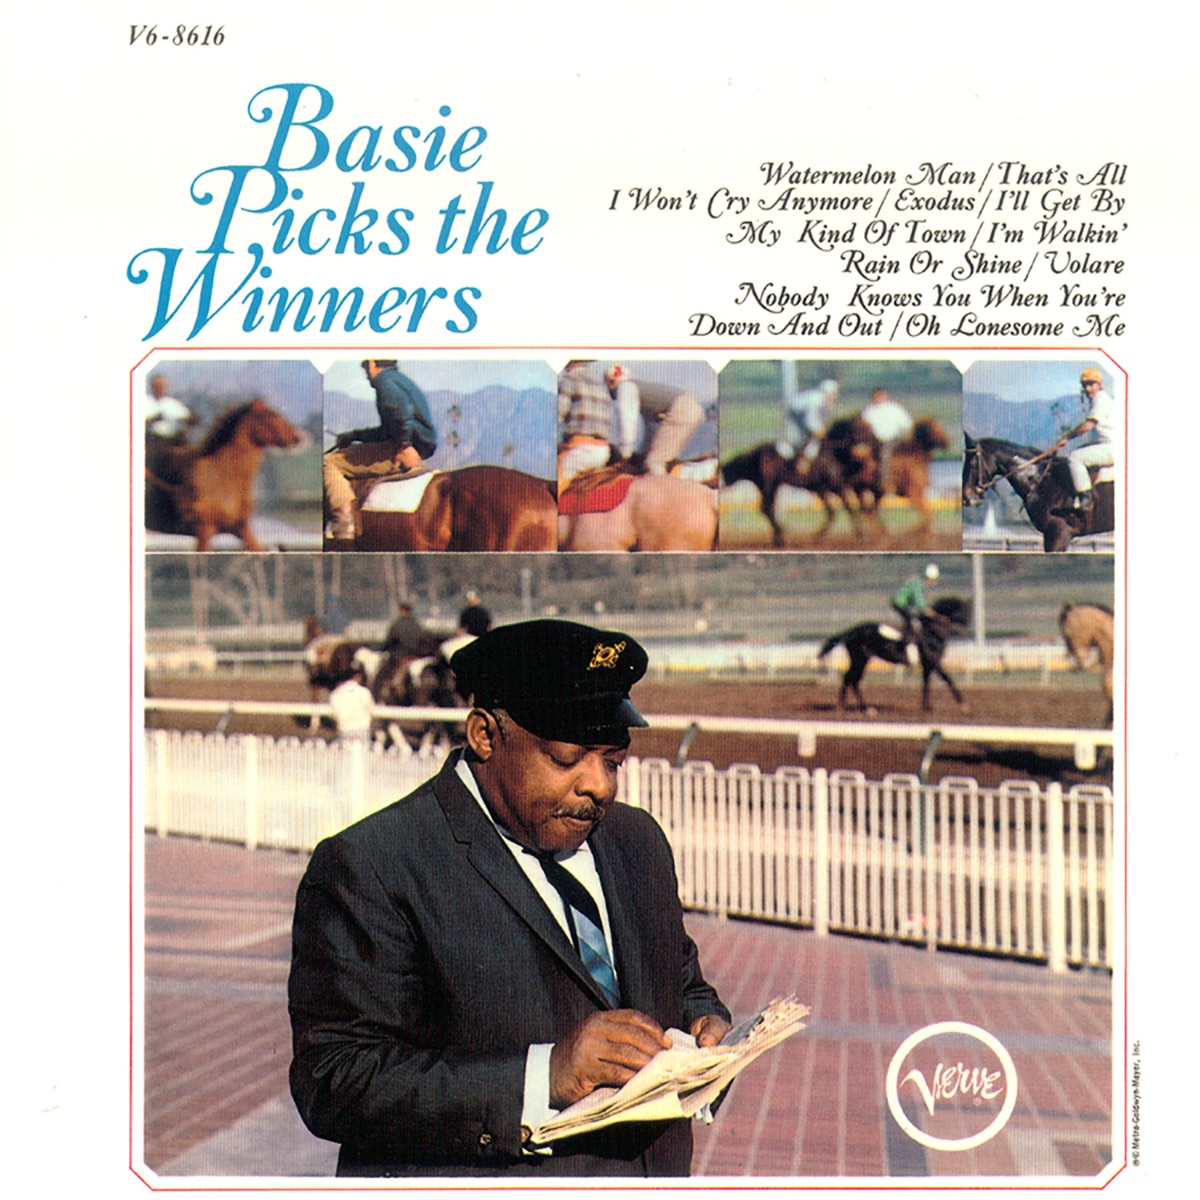 Count Basie Picks the Winners by Count Basie on Apple Music